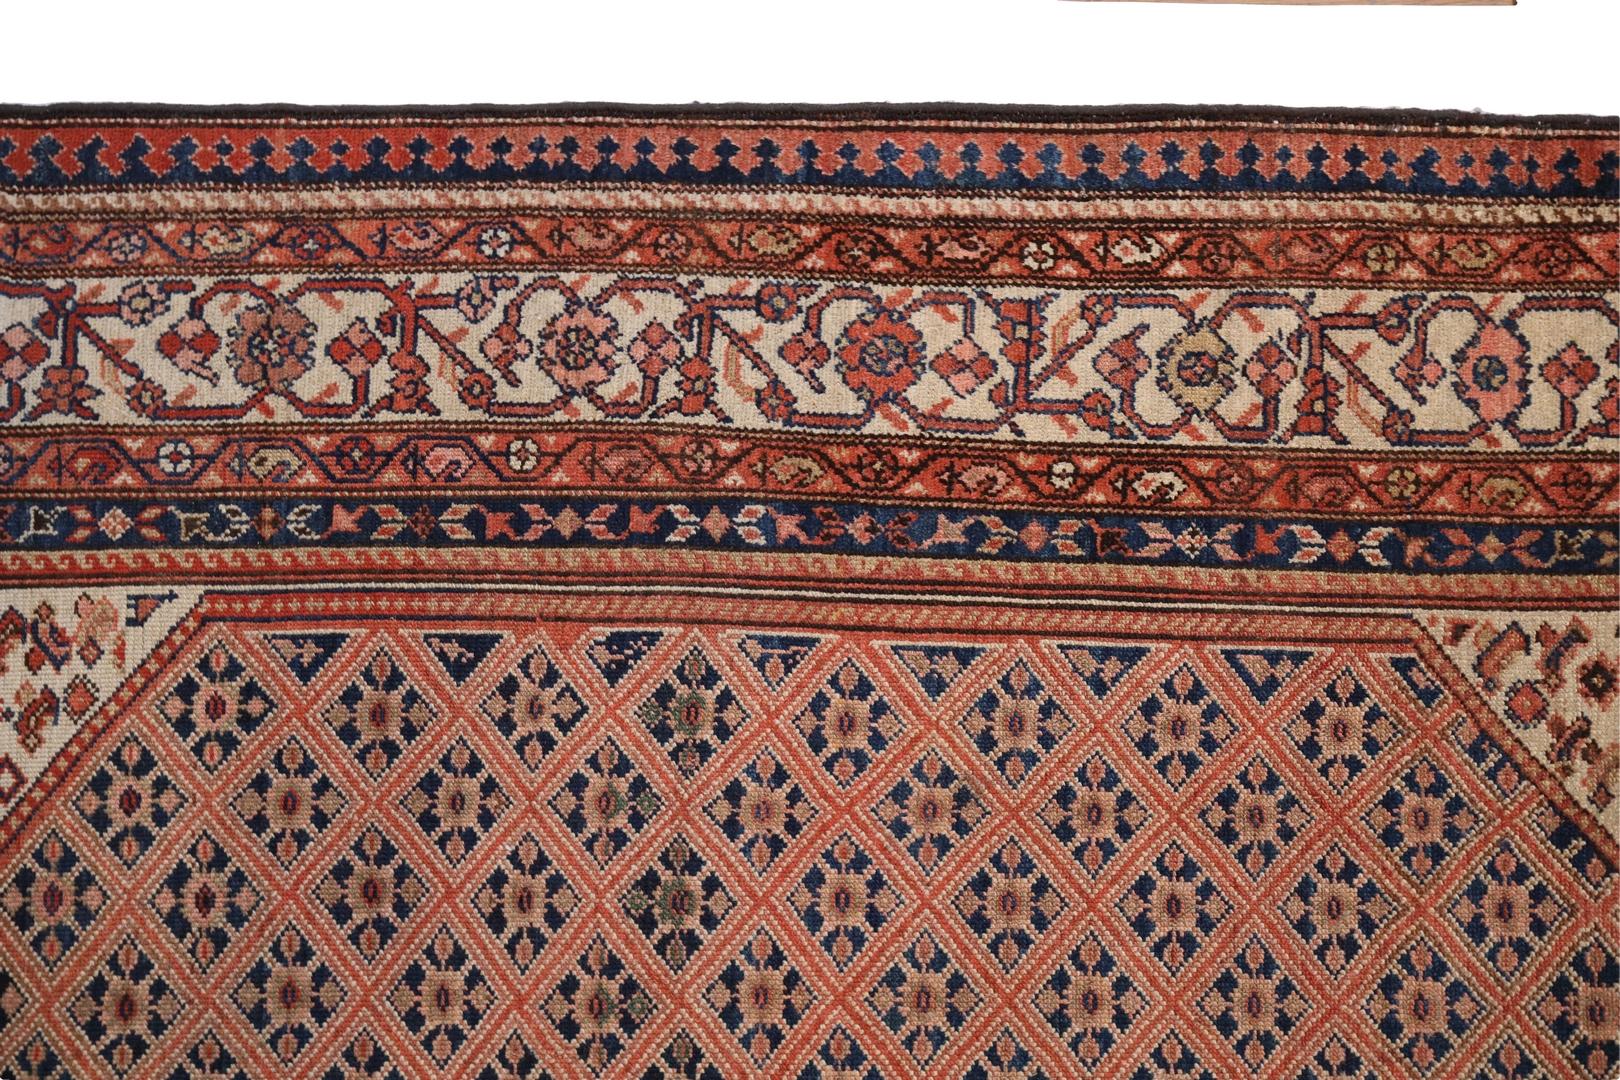 Hand-Knotted Malayer Antique Rug, Red Ivory Blue - 4 x 6 For Sale